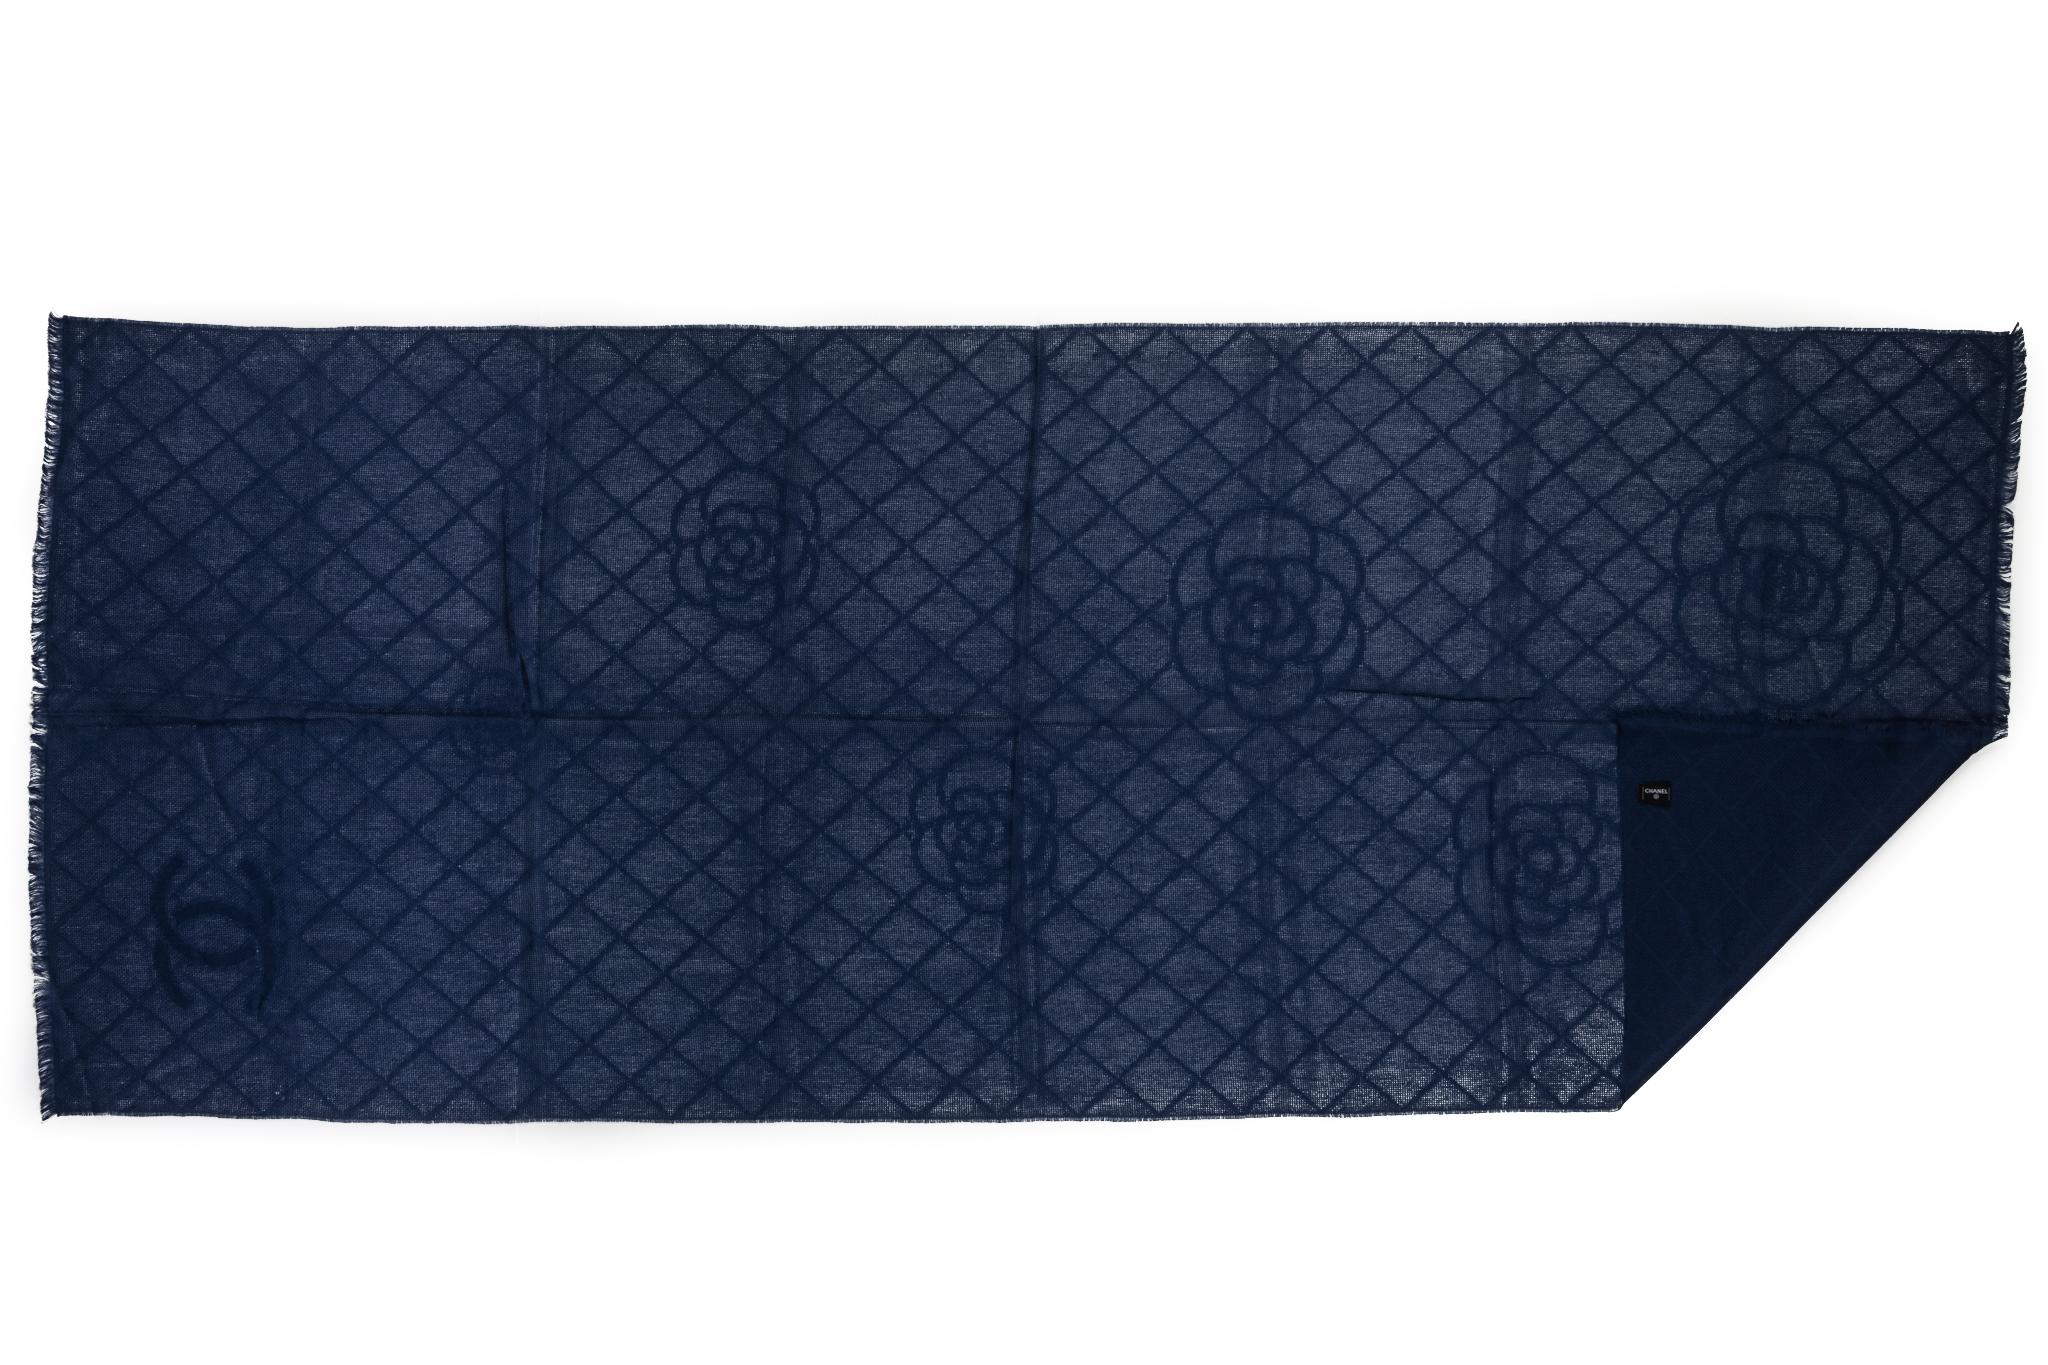 Chanel brand new cashmere and navy blue camellia and logo design shawl. Care tag.